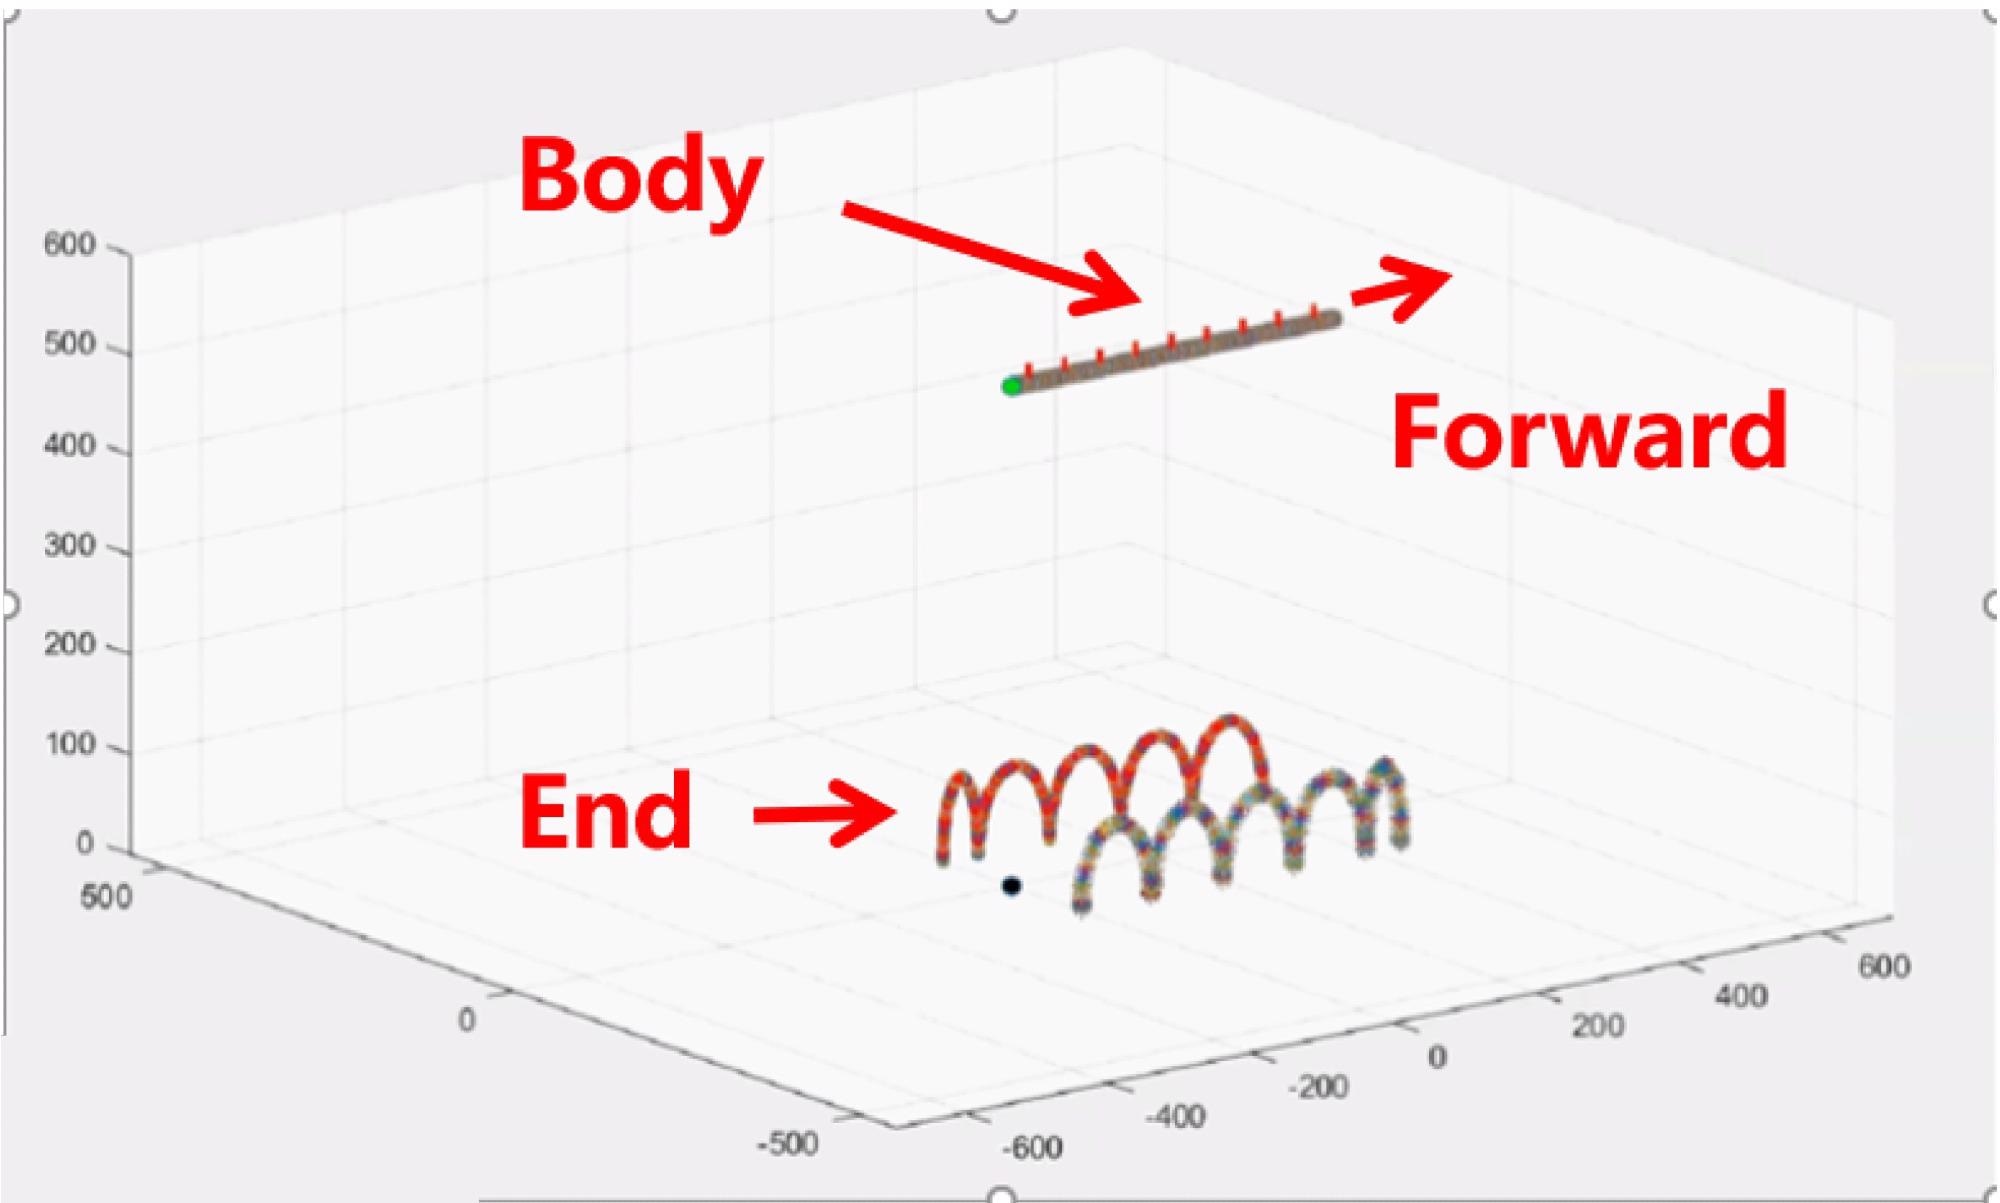 Trajectory planning of body and end.